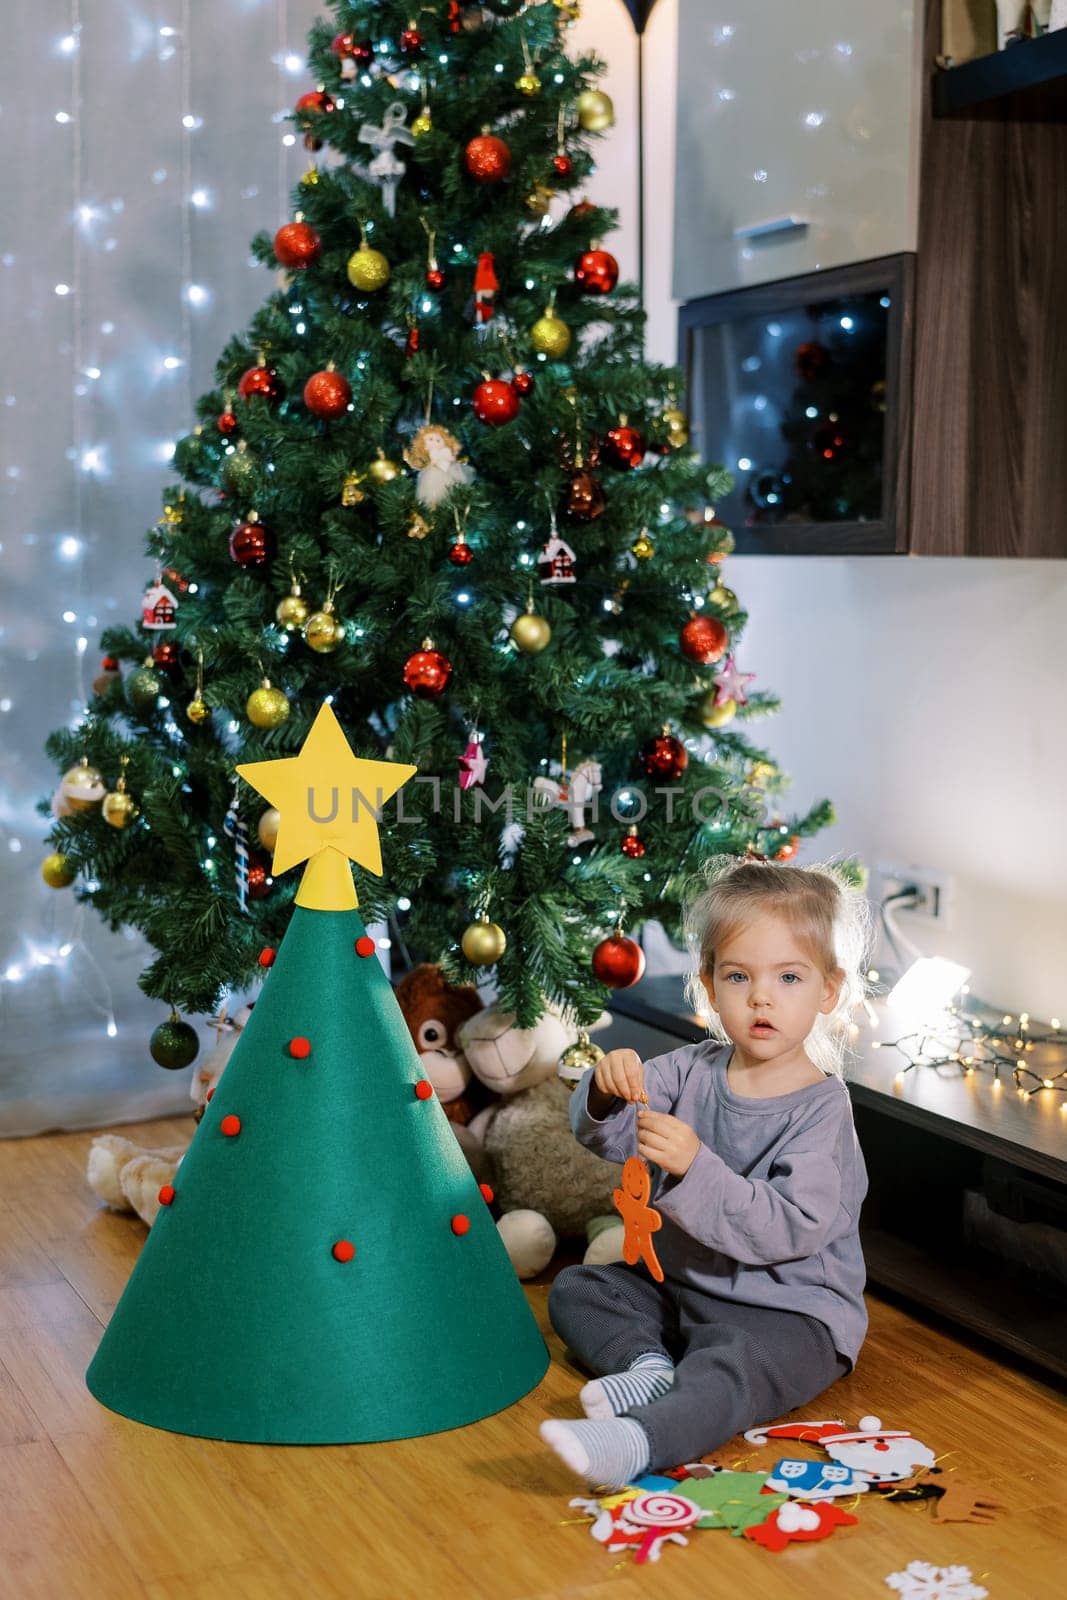 Little girl holds a felt toy in her hands while sitting on the floor near a toy Christmas tree. High quality photo